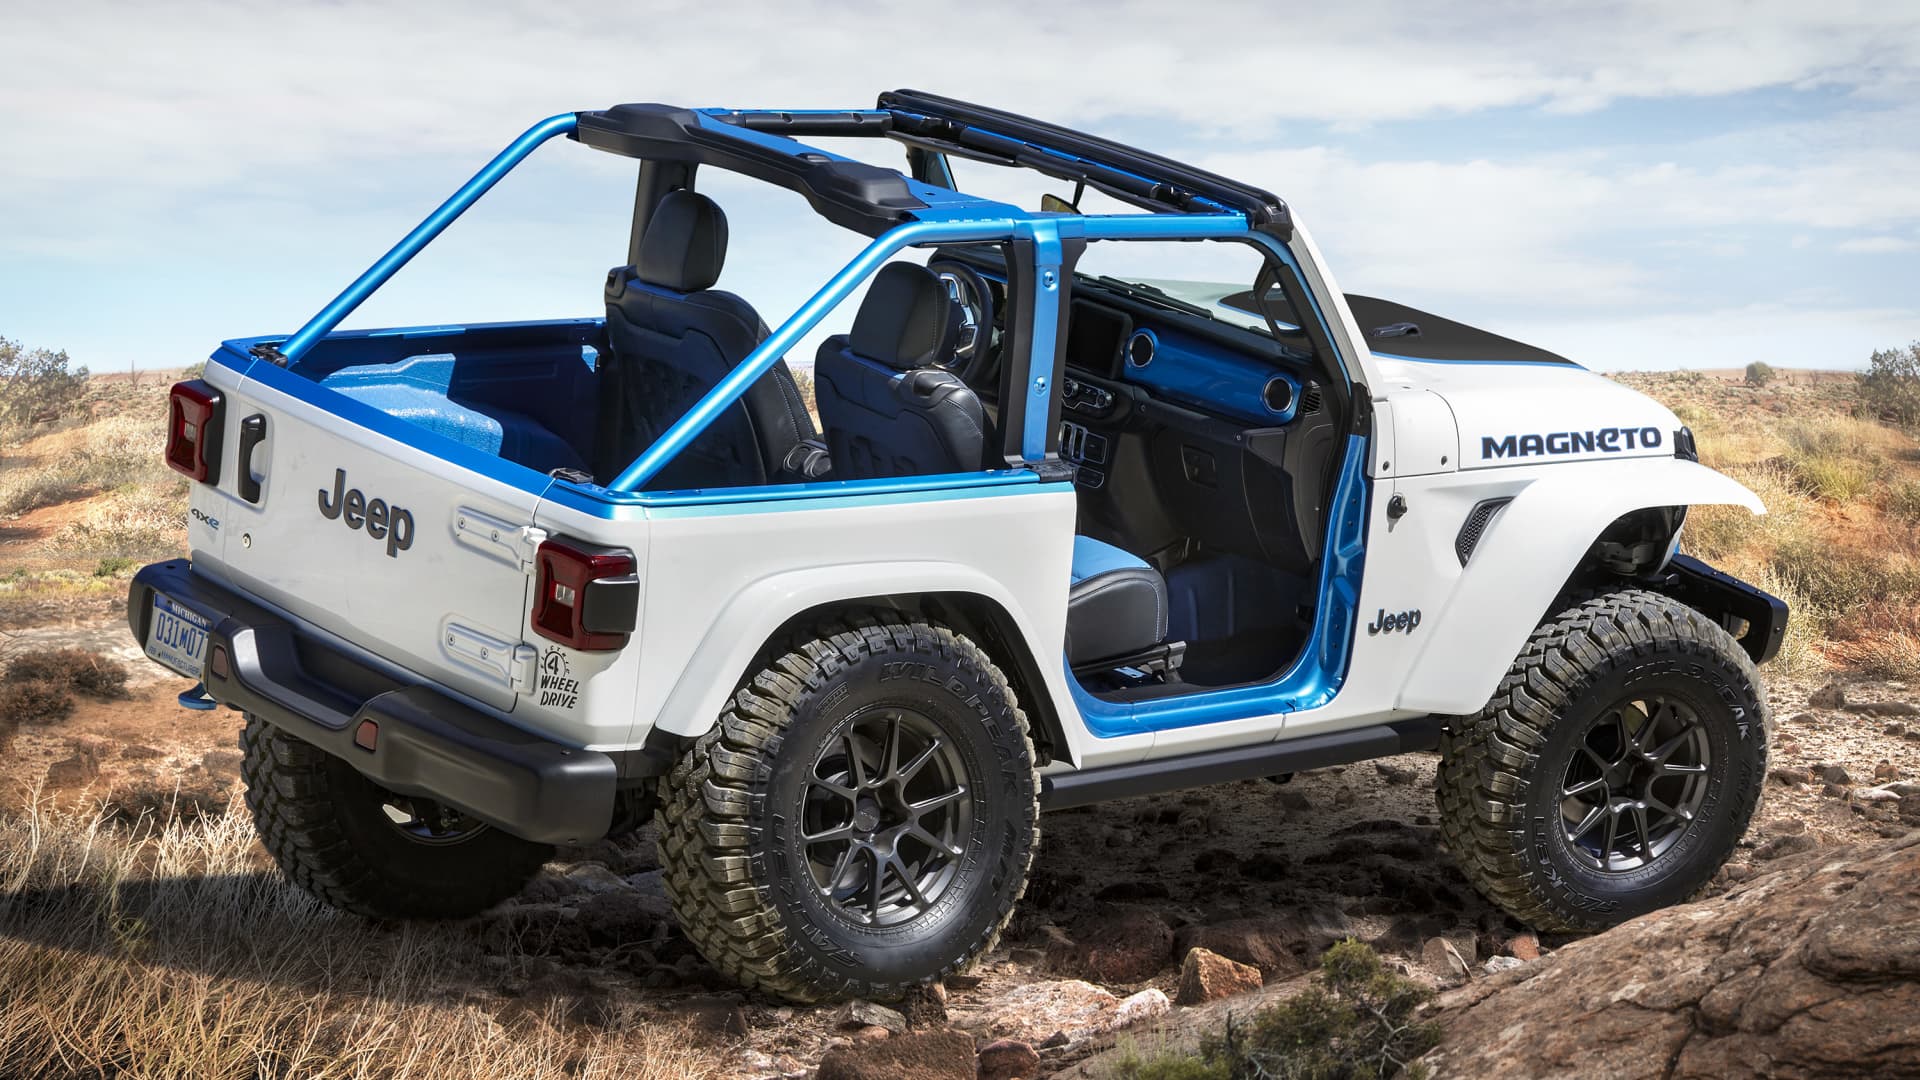 The Jeep Wrangler Magneto concept is a fully electric SUV based on a two-door 2020 Jeep Wrangler Rubicon.